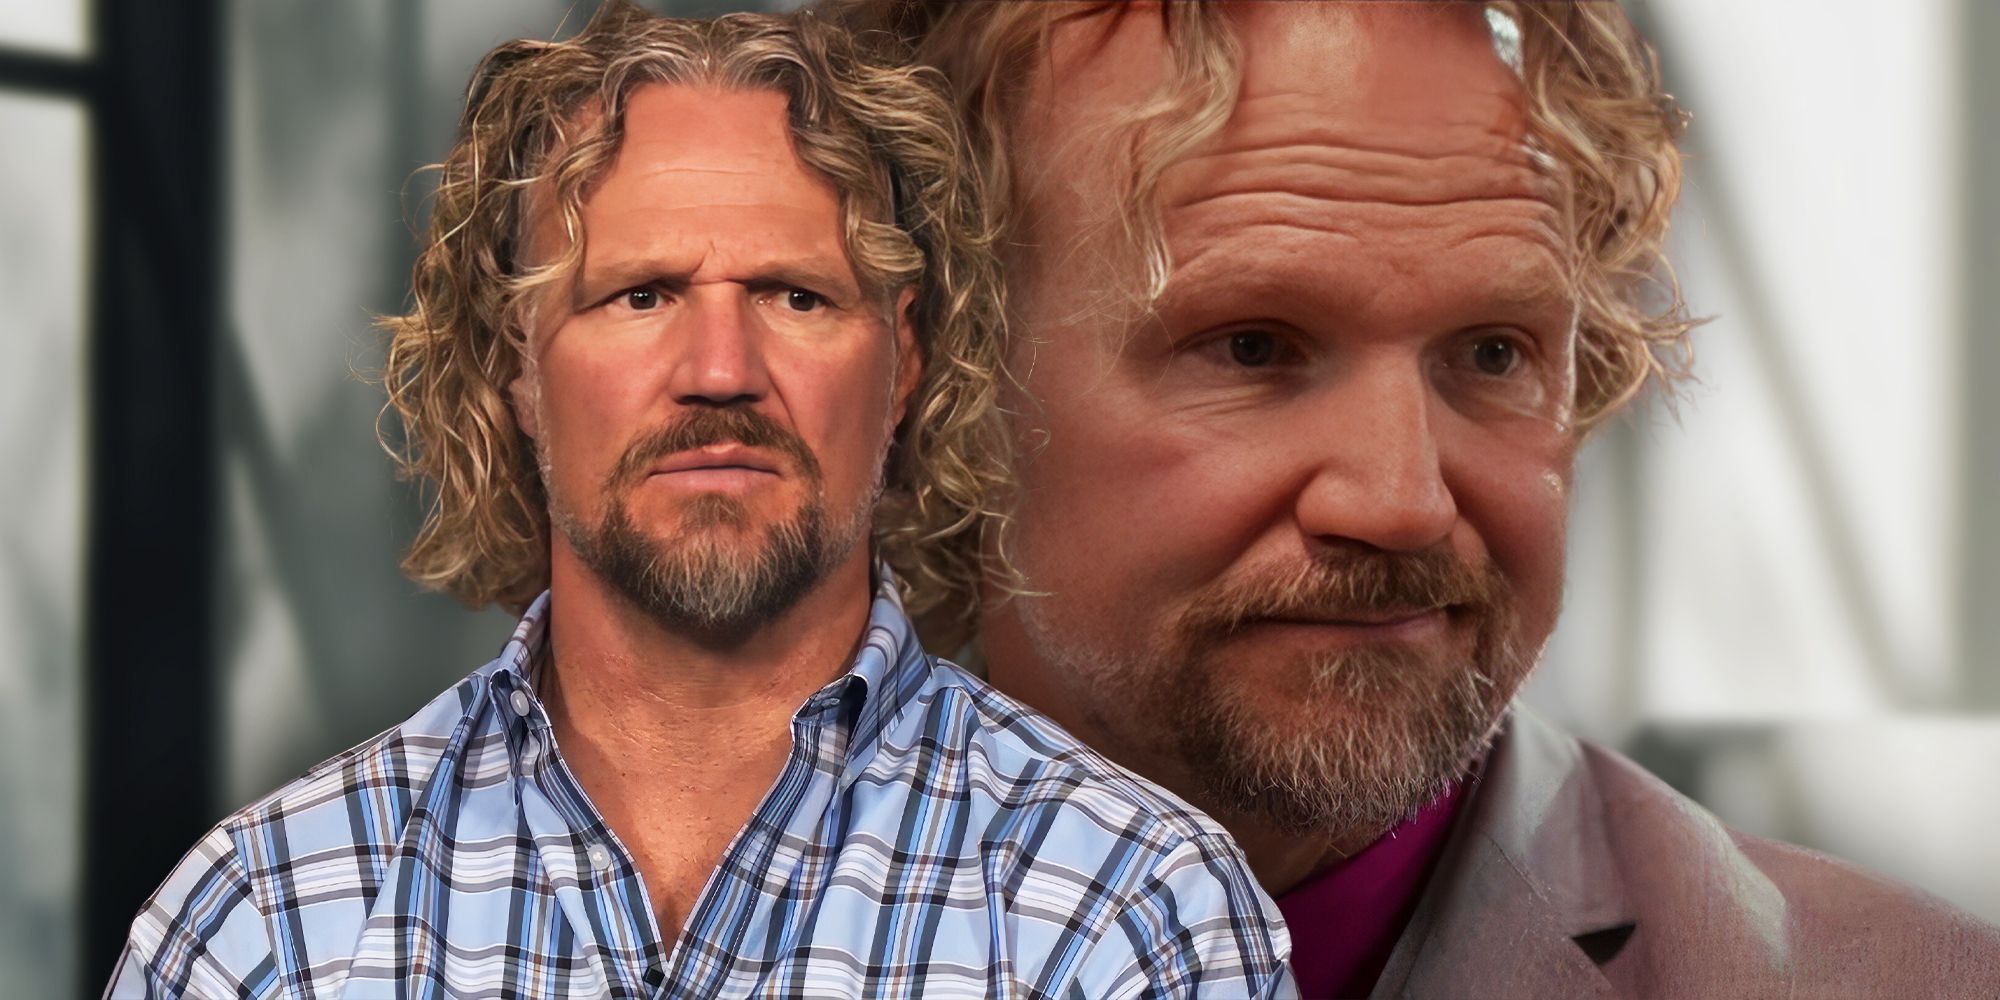 Side by side images of Kody Brown from Sister Wives